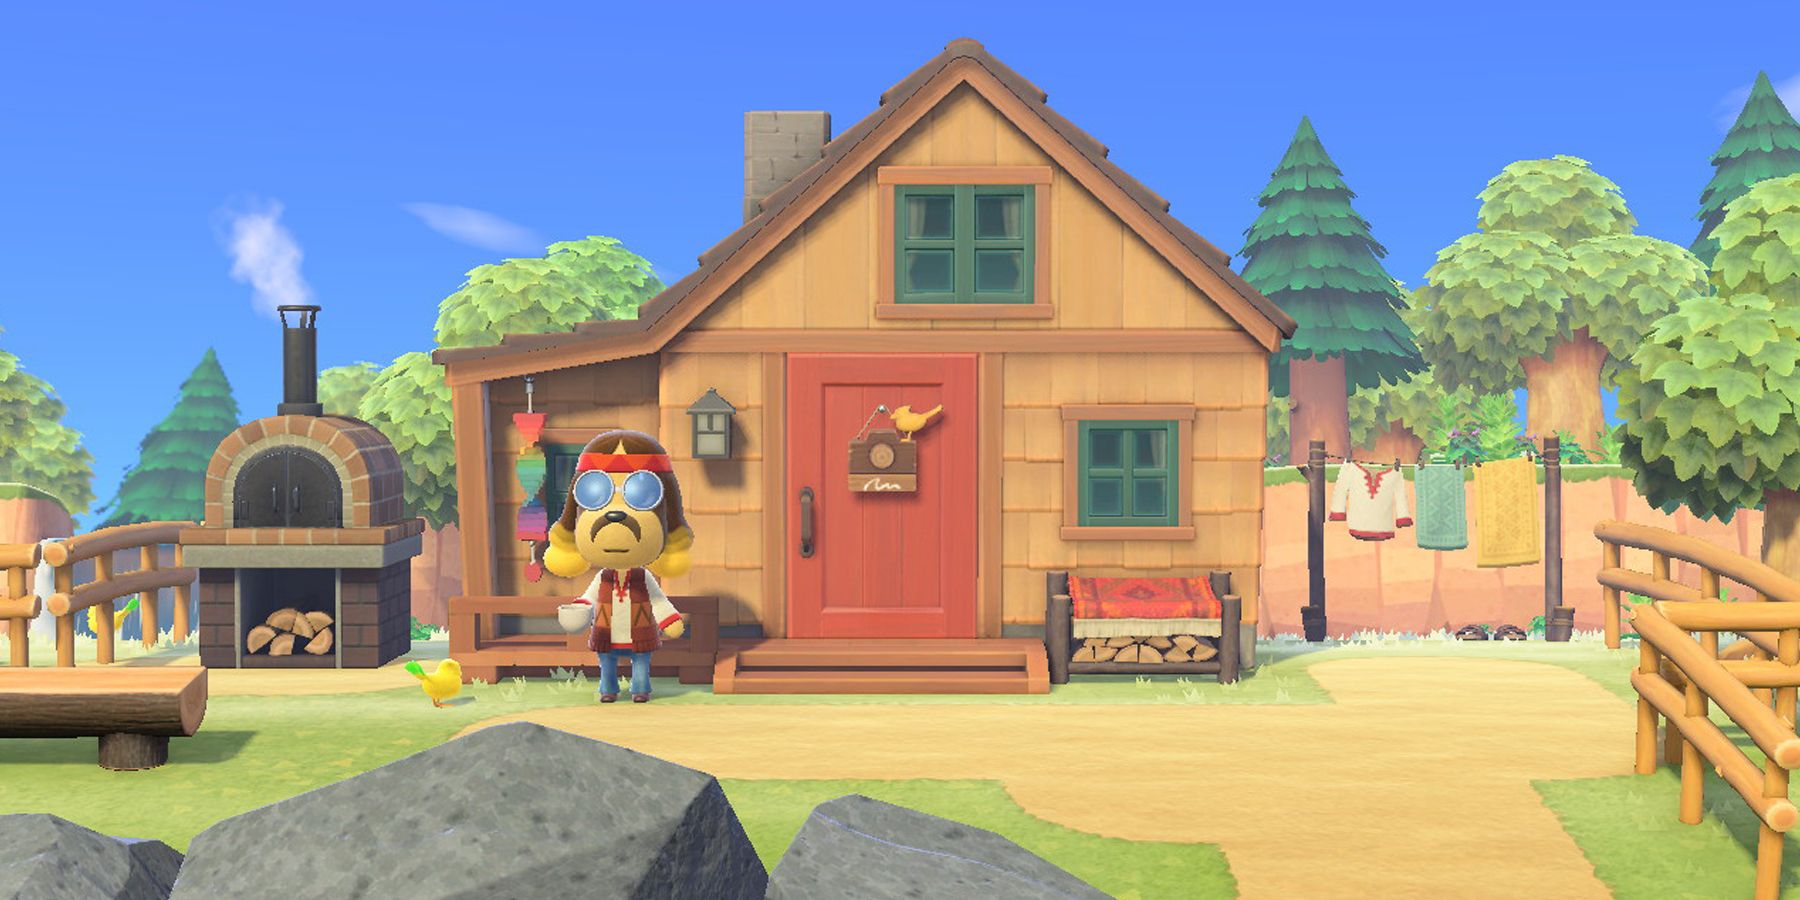 Harvey stands in front of his house and photo studio on Harv's Island in Animal Crossing: New Horizons.